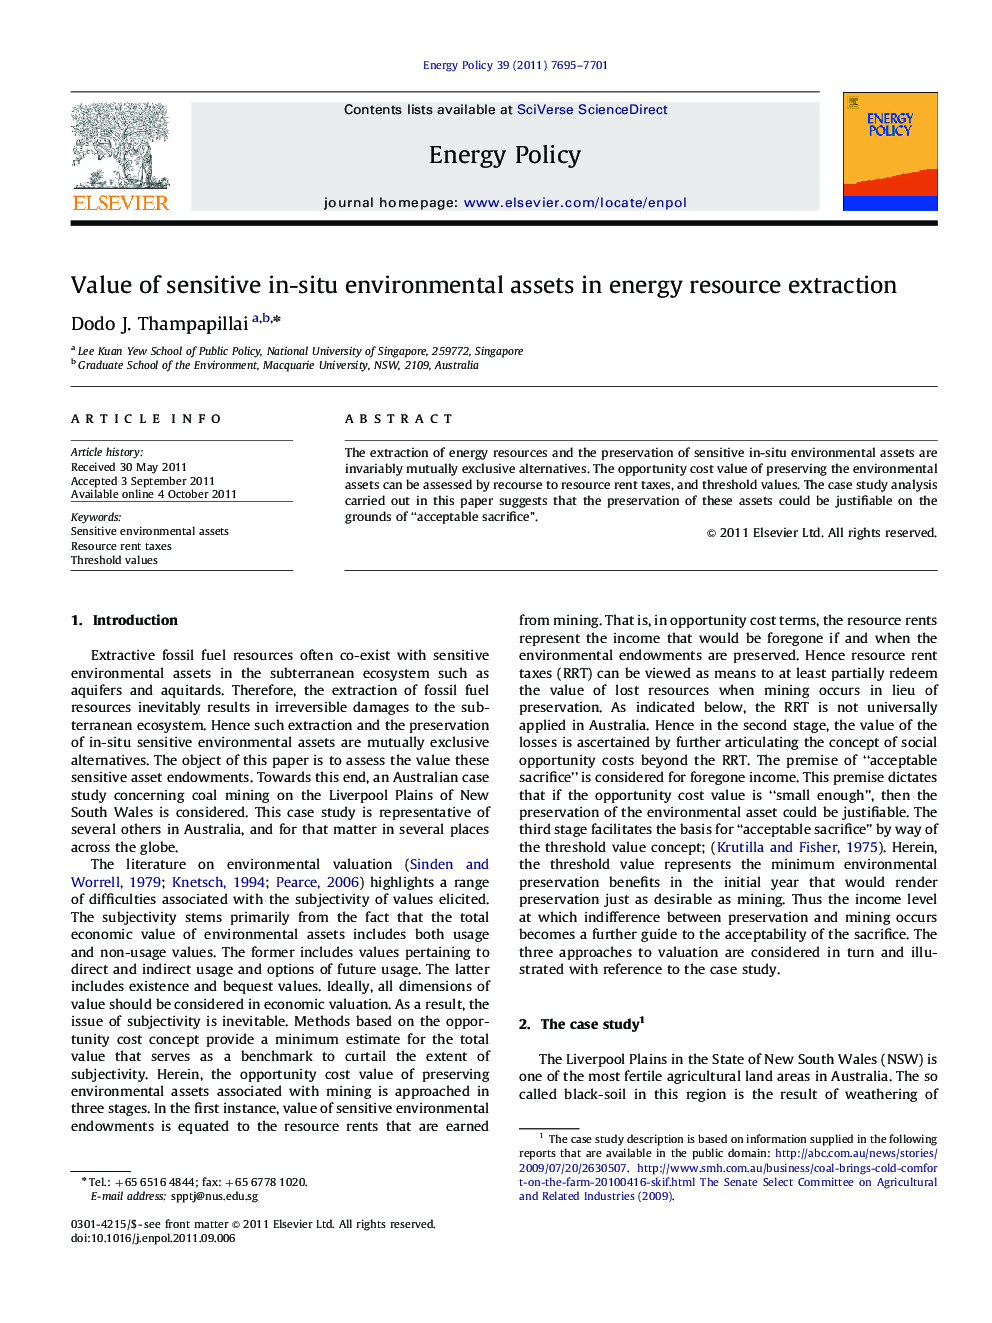 Value of sensitive in-situ environmental assets in energy resource extraction